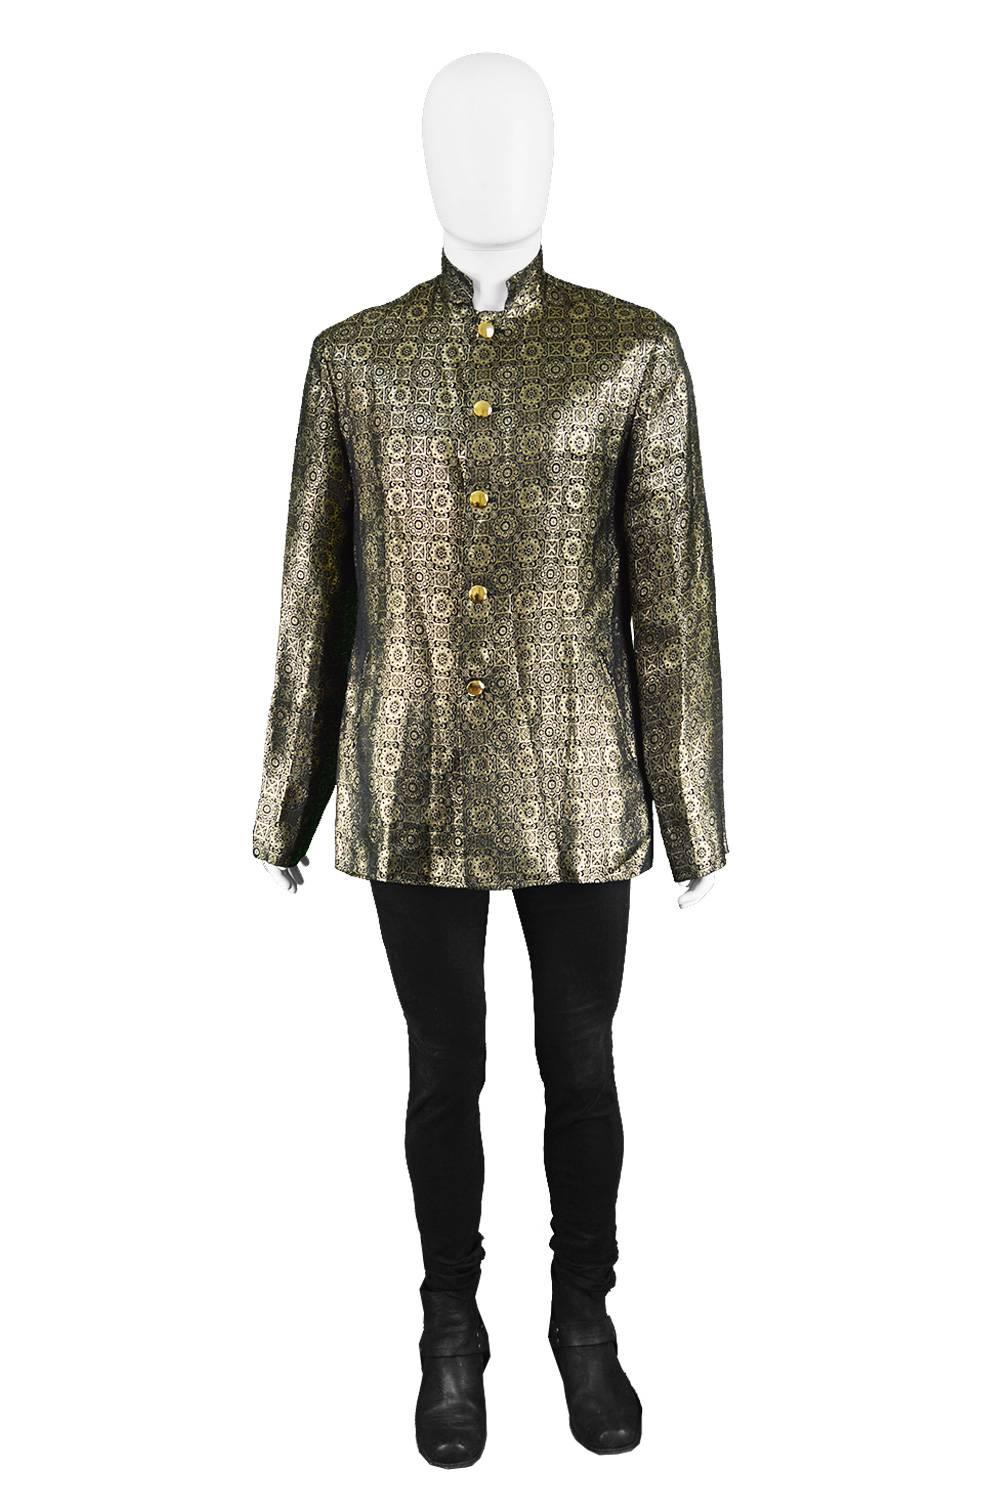 Vintage 1960s Men's Metallic Gold Brocade Nehru Collar Rare Mod Jacket

Estimated Size: Men's Medium. would suit a taller man due to long sleeves (or you could have it tailored). Please check measurements. 
Chest - 40” / 101cm
Length (Shoulder to